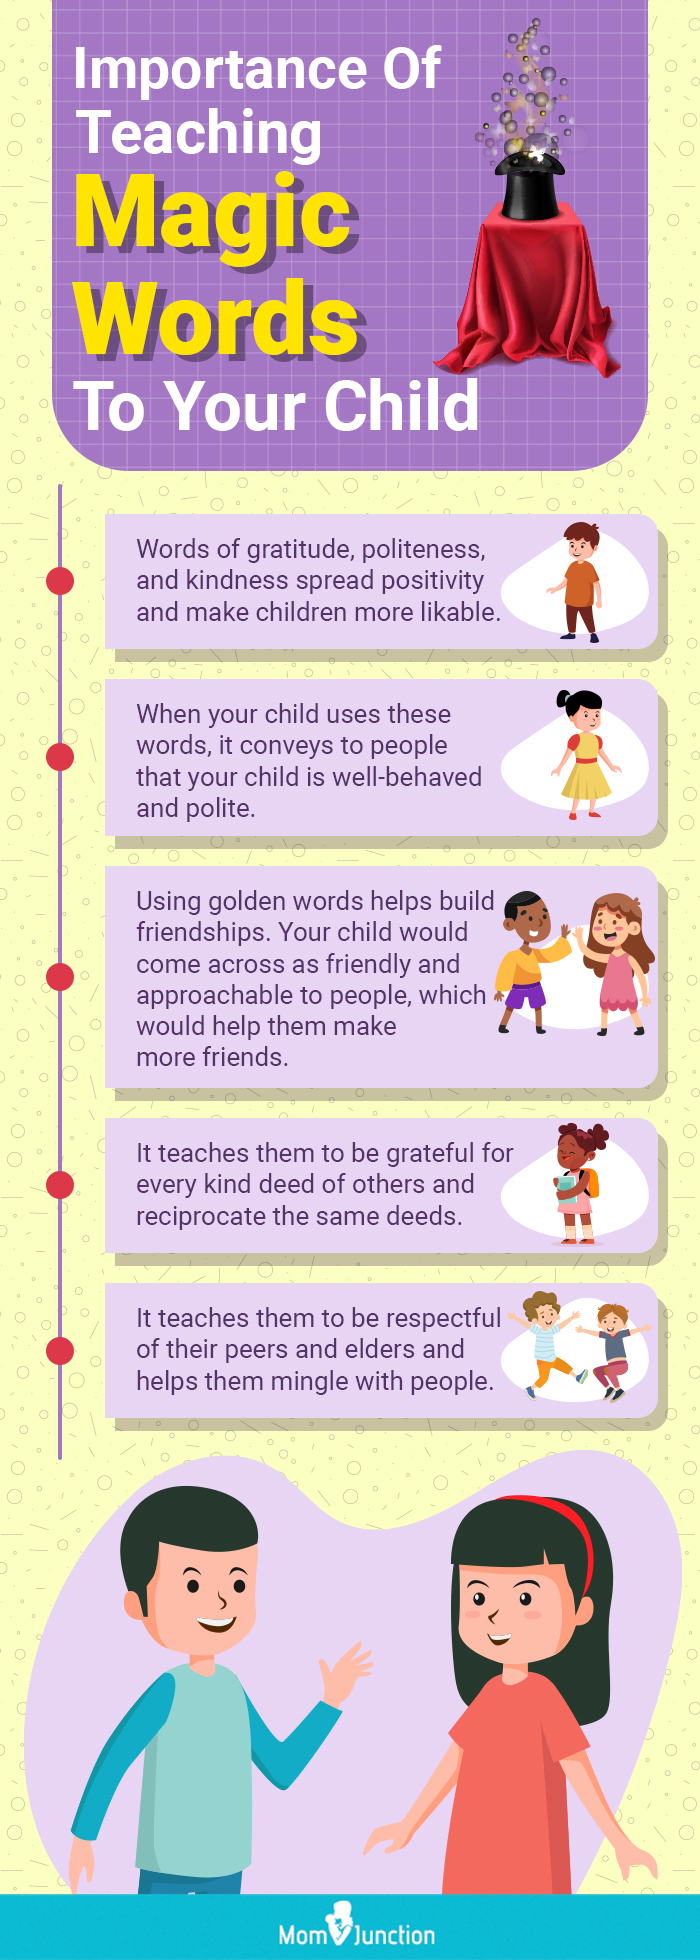 importance of teaching magic words to your child [infographic]